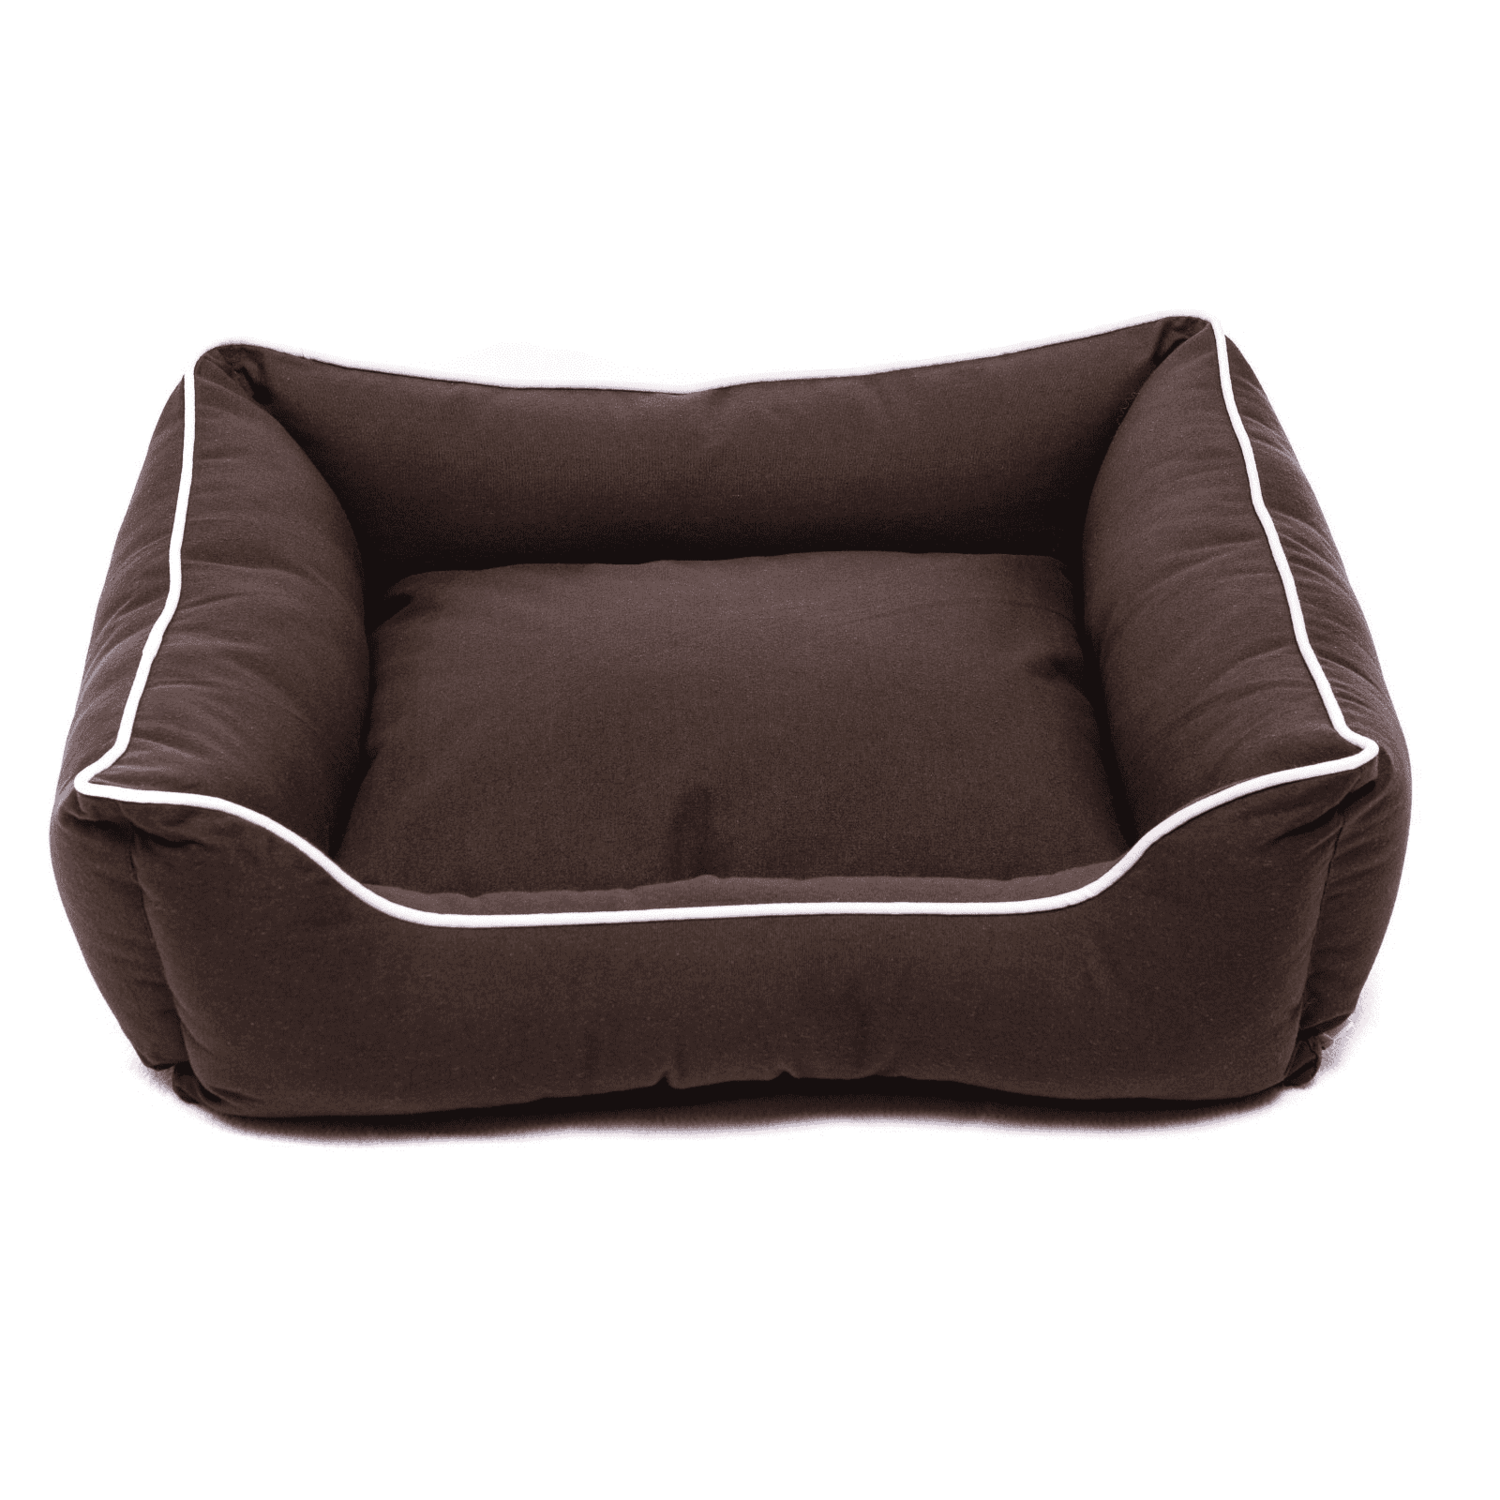 DGS BED LOUNGER 22X20 EXPRES